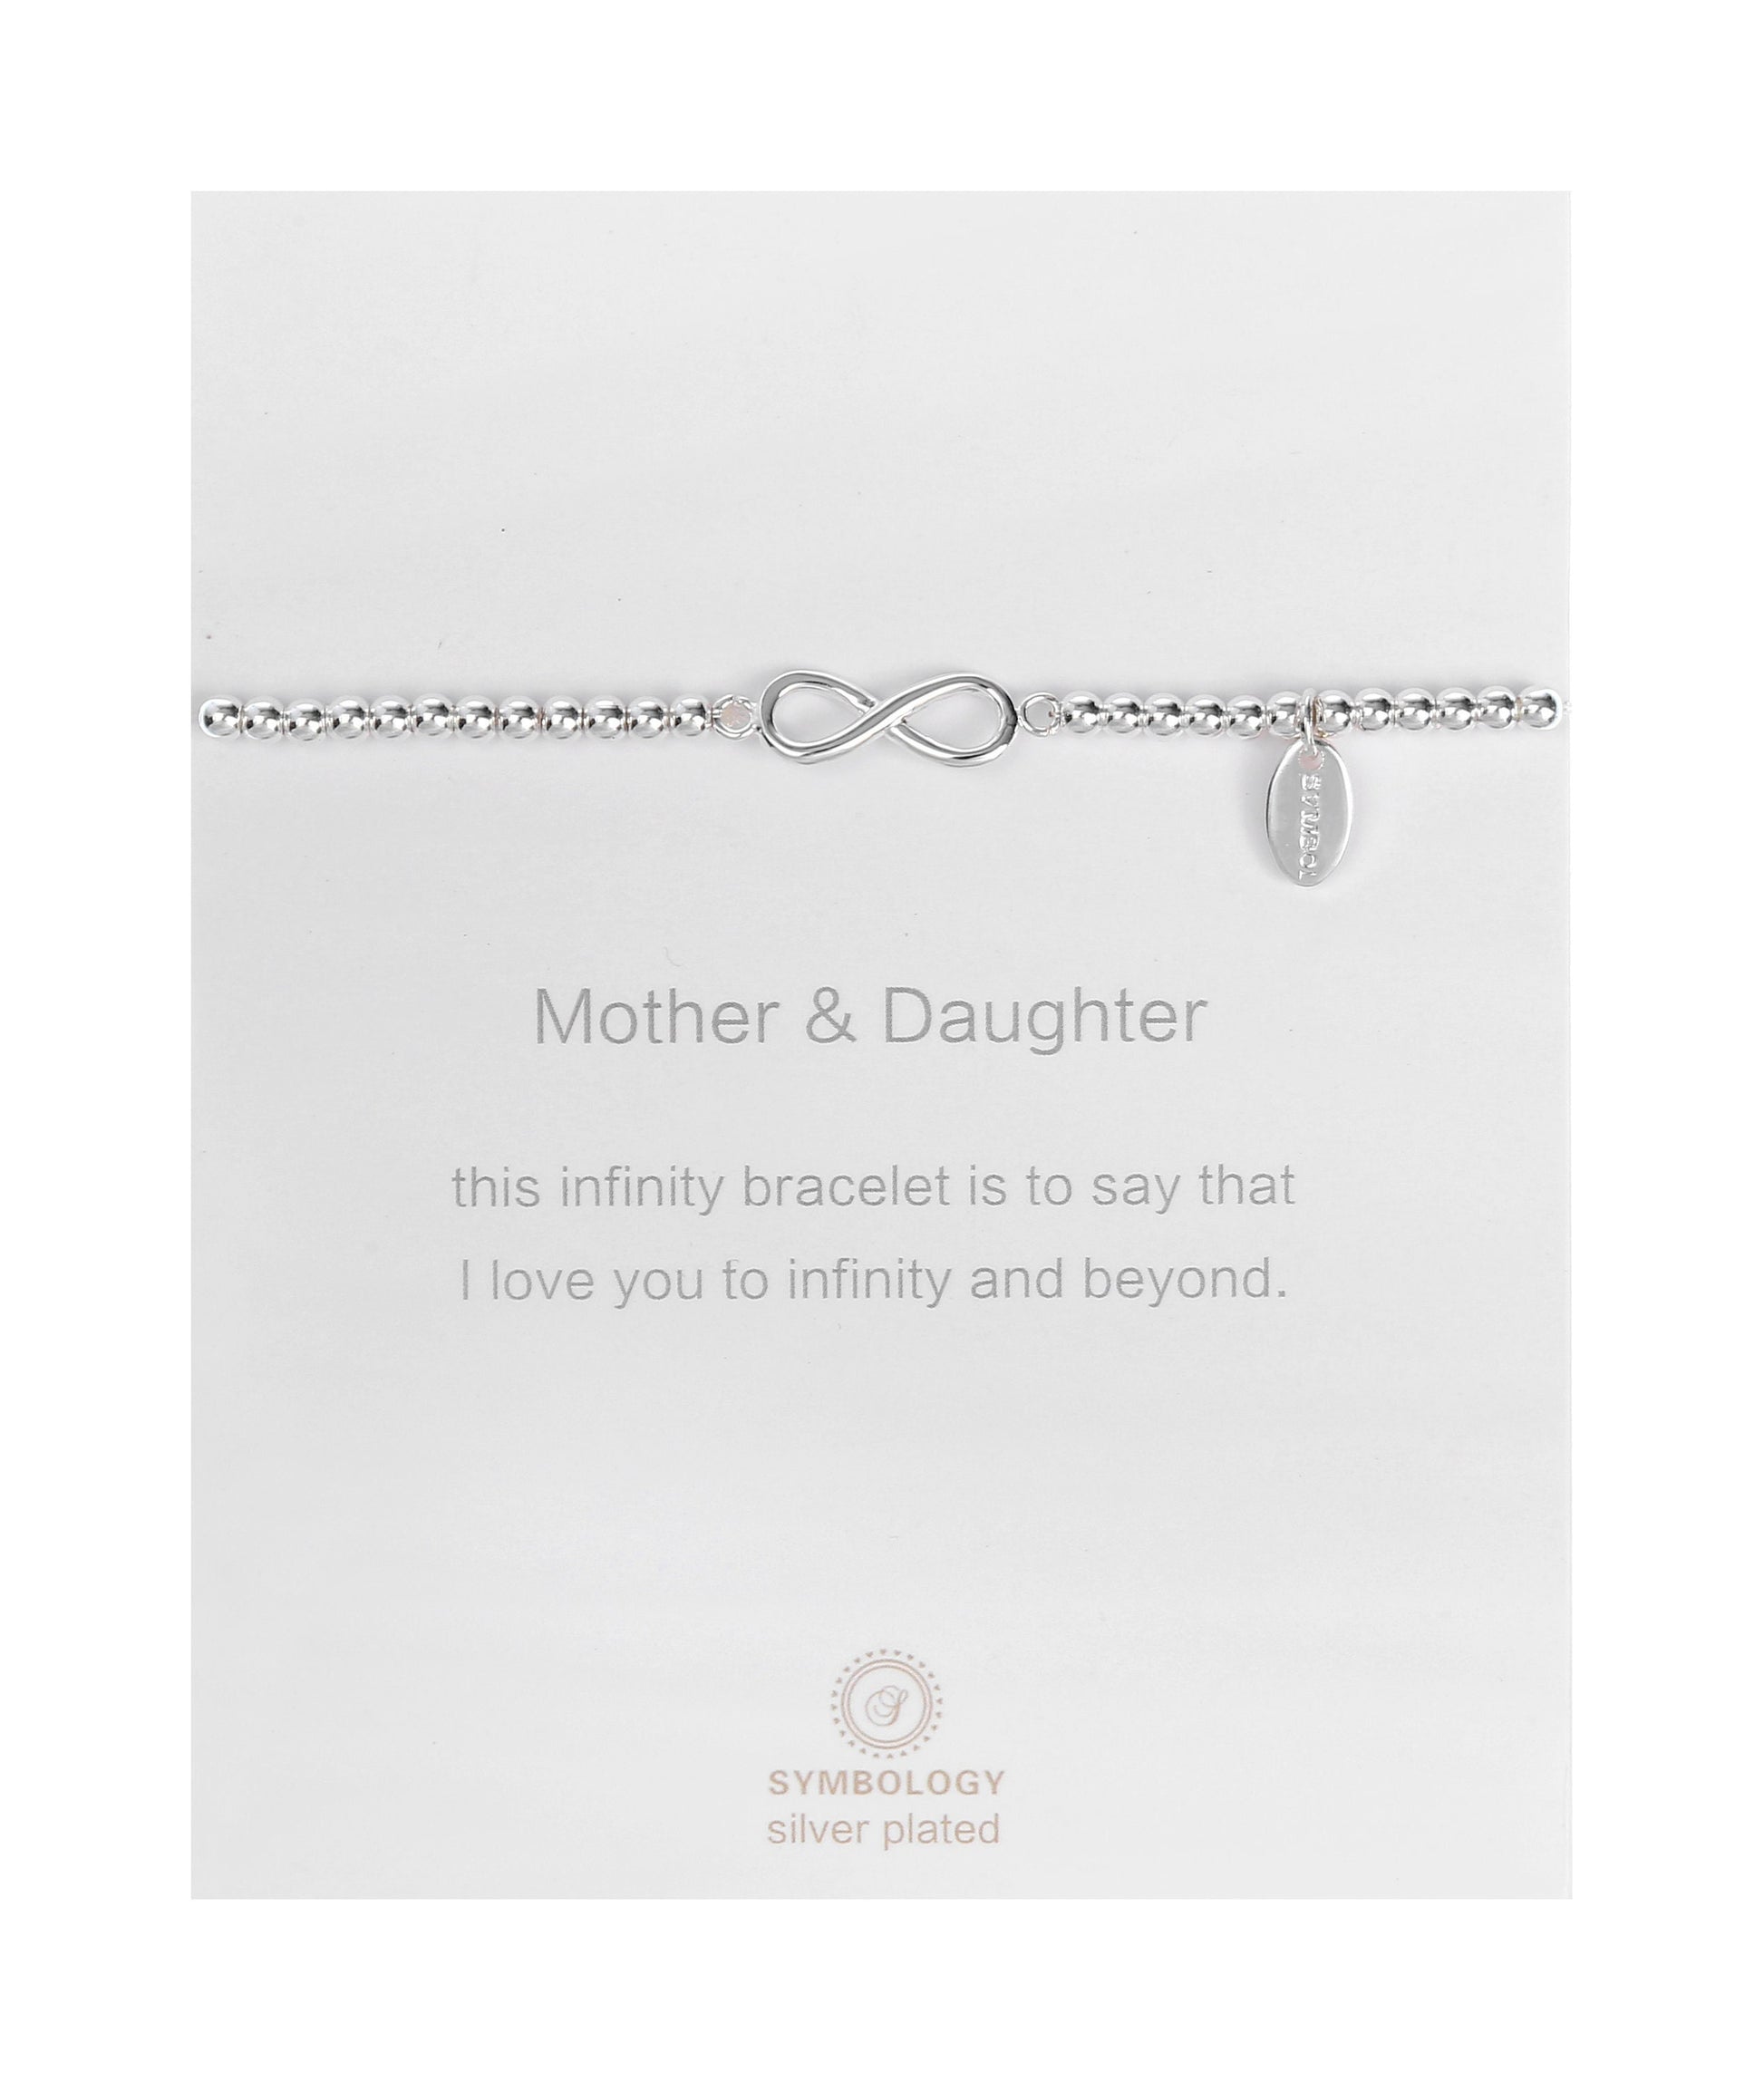 Silver Mother Daughter Bracelet, Mother of the Bride Gift, Silver beads Infinity Bracelet, Birthday gift for Her, Gift for Mum / Daughter